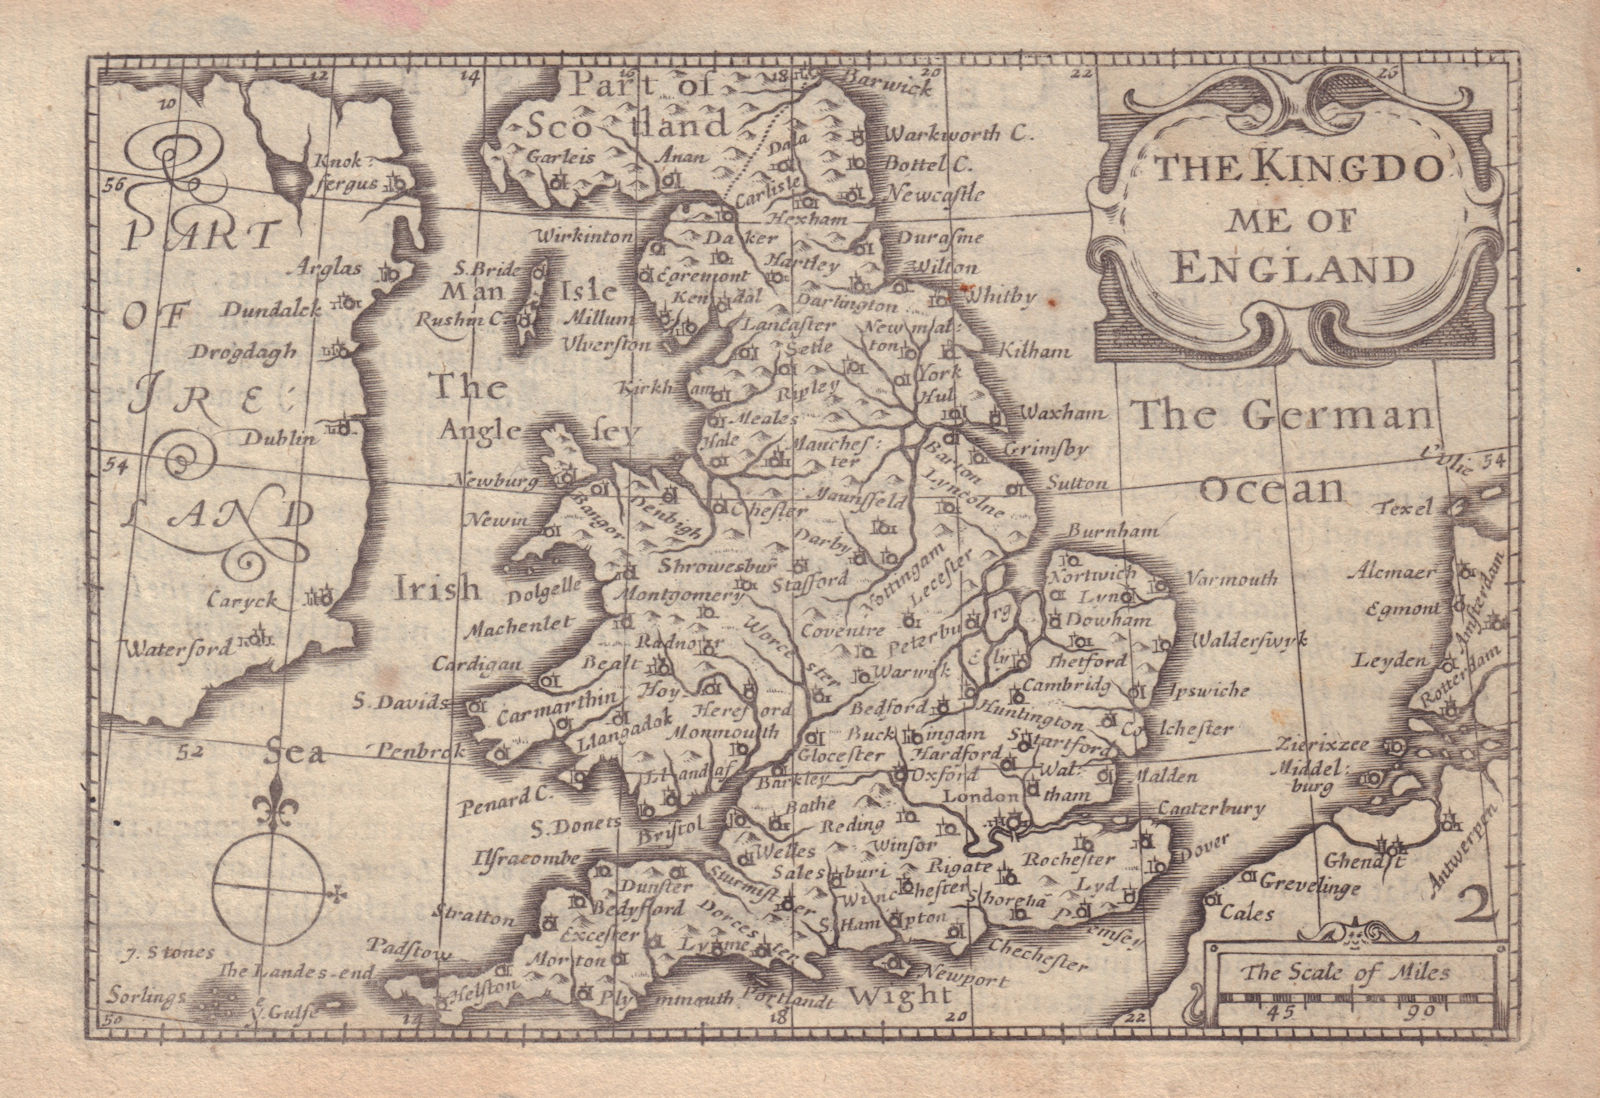 The Kingdome of England by van den Keere. "Speed miniature" 1632 old map